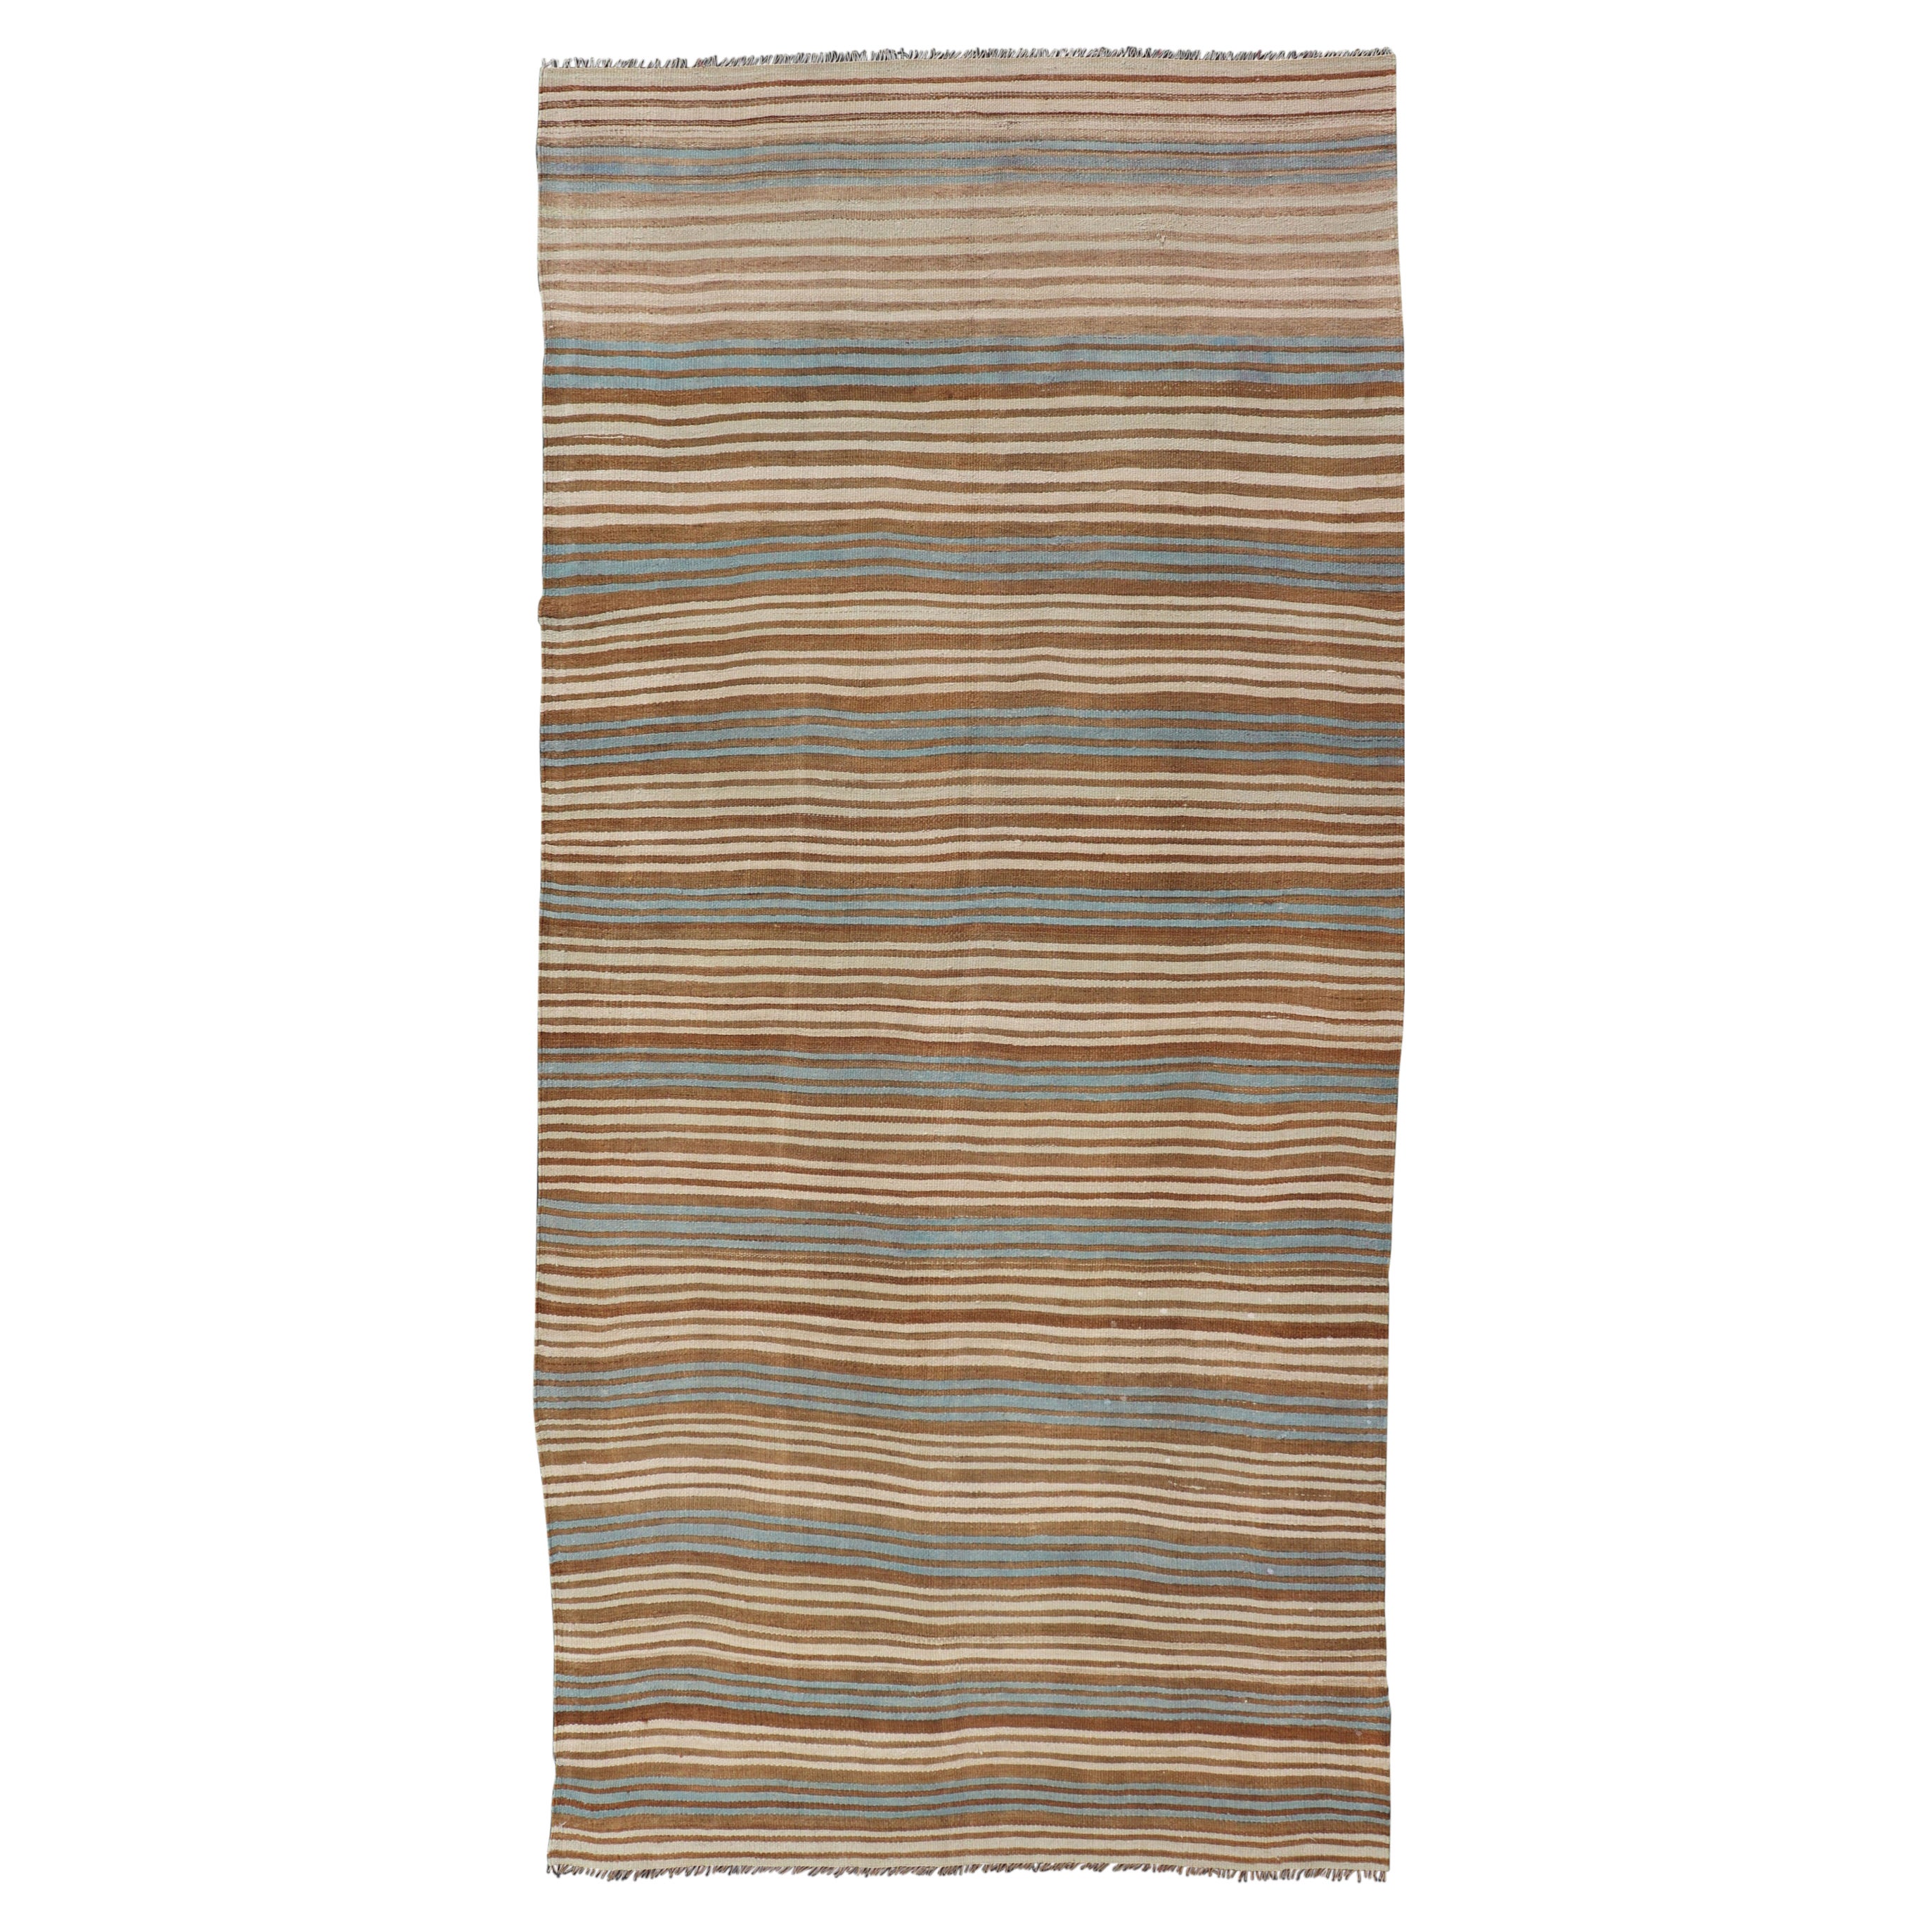 Vintage Hand Woven Turkish Kilim with Stripes in Brown, Cream and Light Blue For Sale